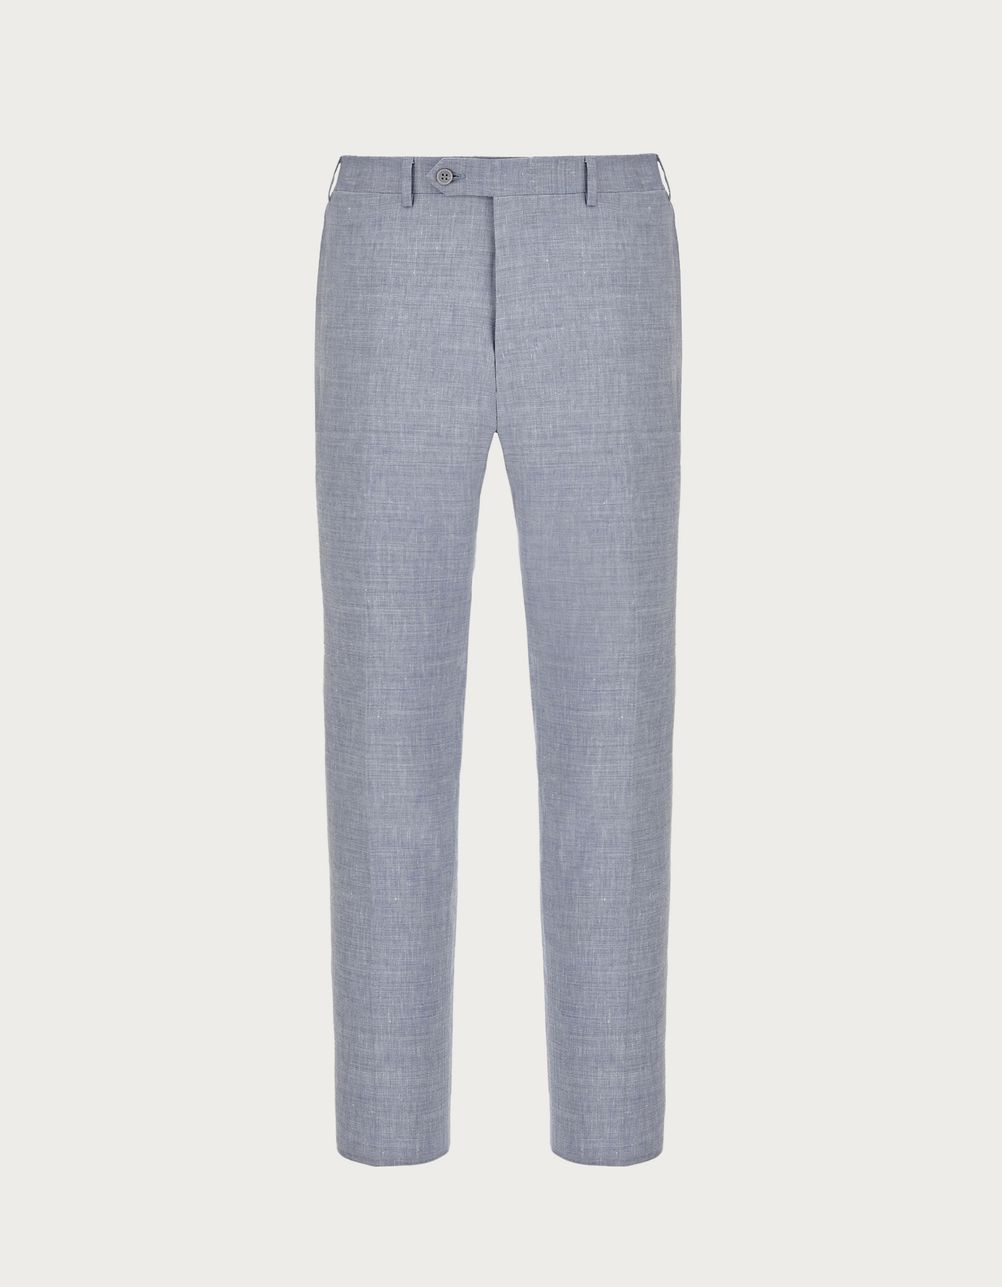 Light blue pants in linen and wool